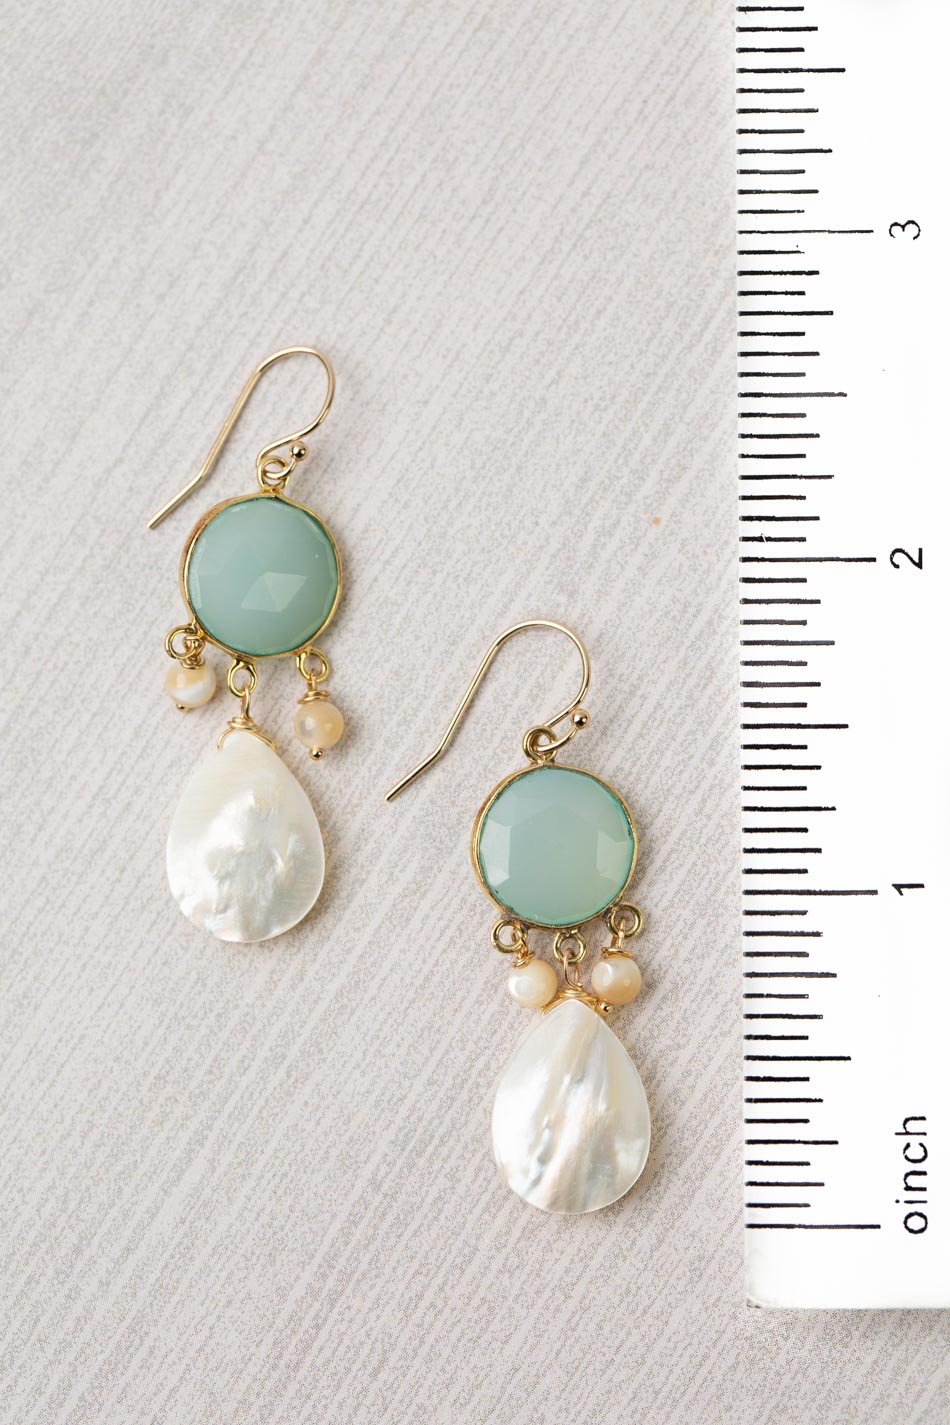 Limited Edition Faceted Chalcedony Bezel With Smooth Mother Of Pearl Teardrop Statement Earrings